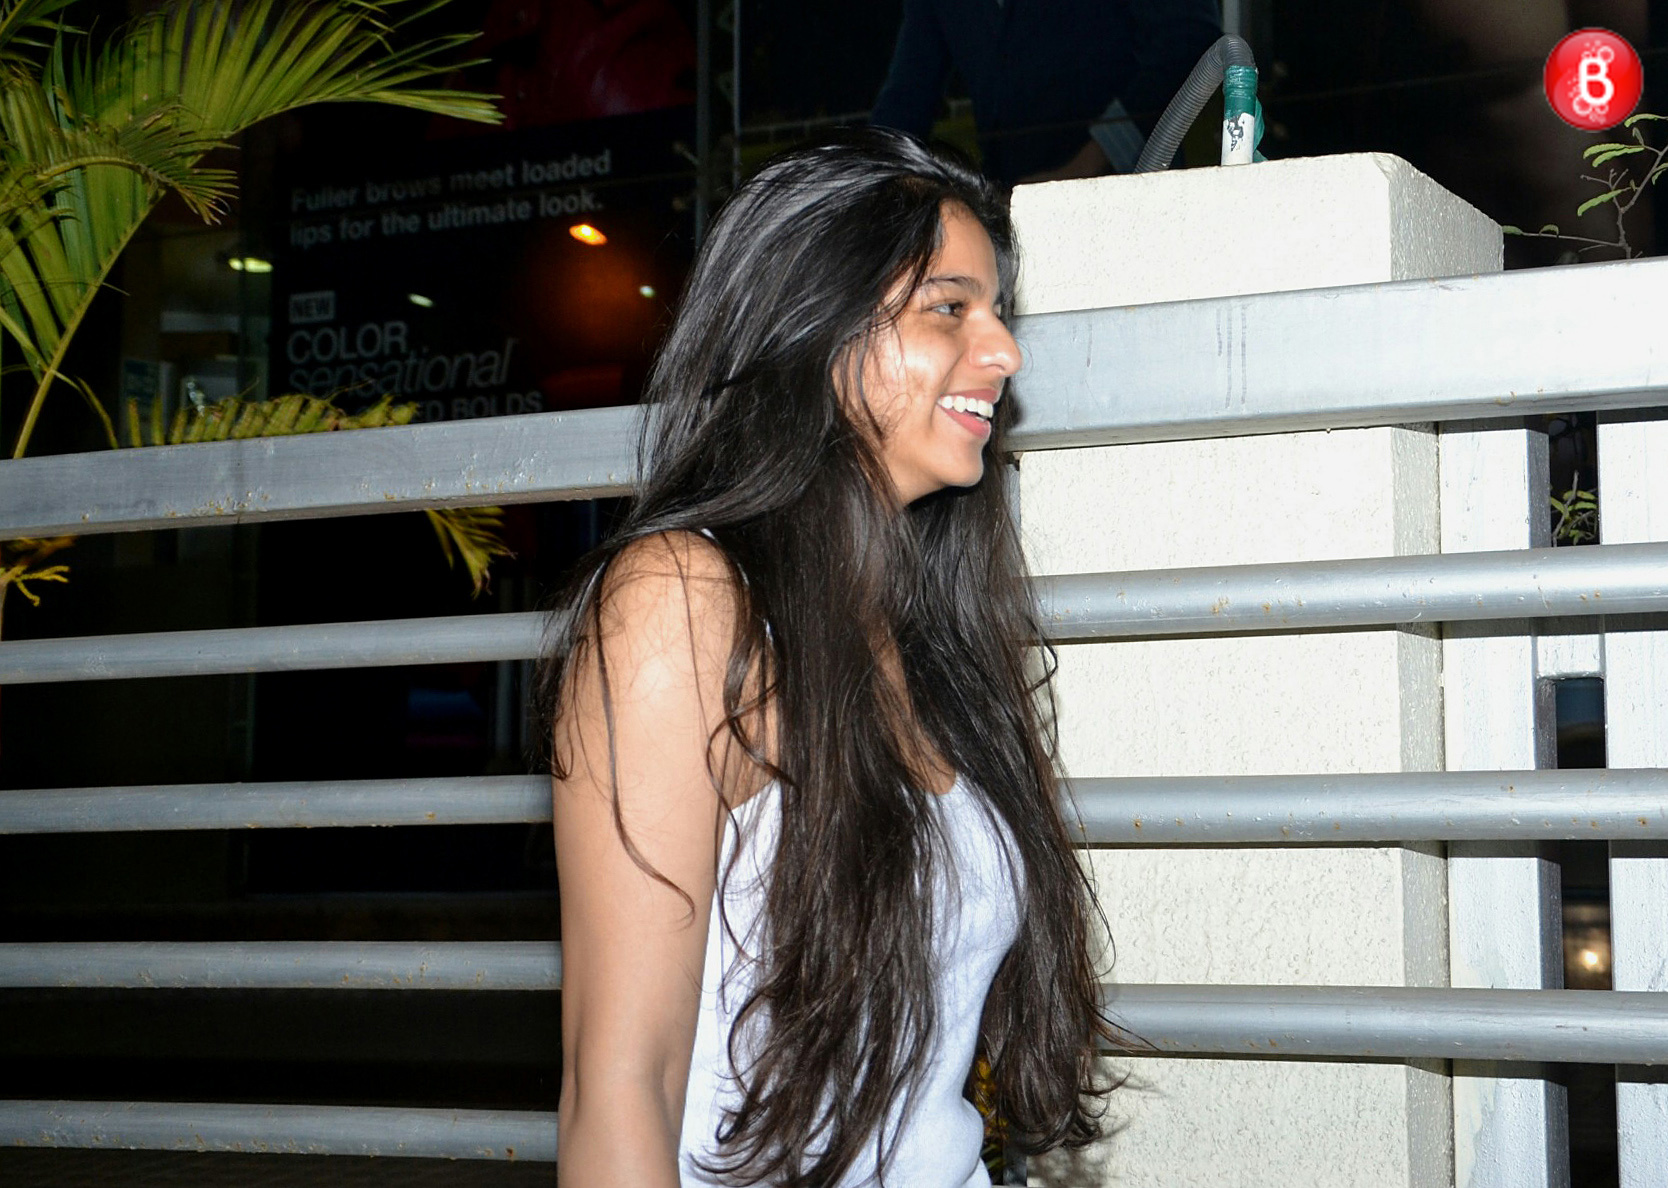 Suhana Khan is snapped along with her friends